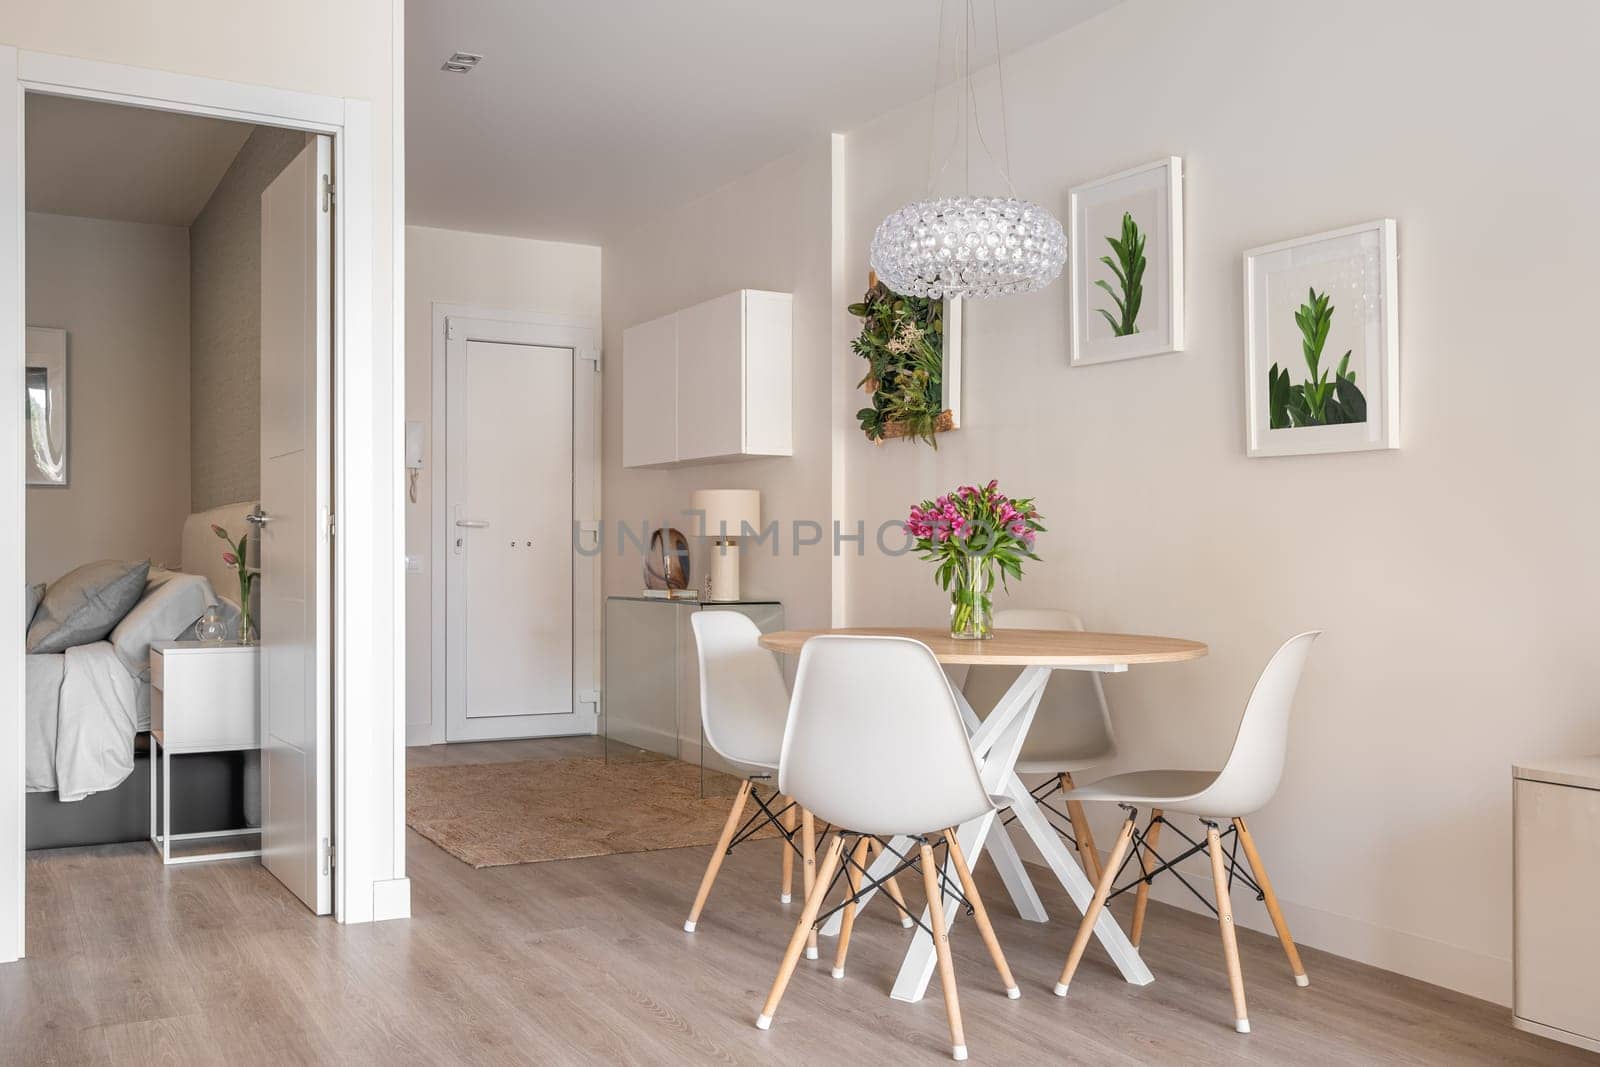 Stylish interior in a compact apartment with a spacious combined living room with table, chairs and decorative accessories overlooking the open bedroom. Cozy city apartment by apavlin